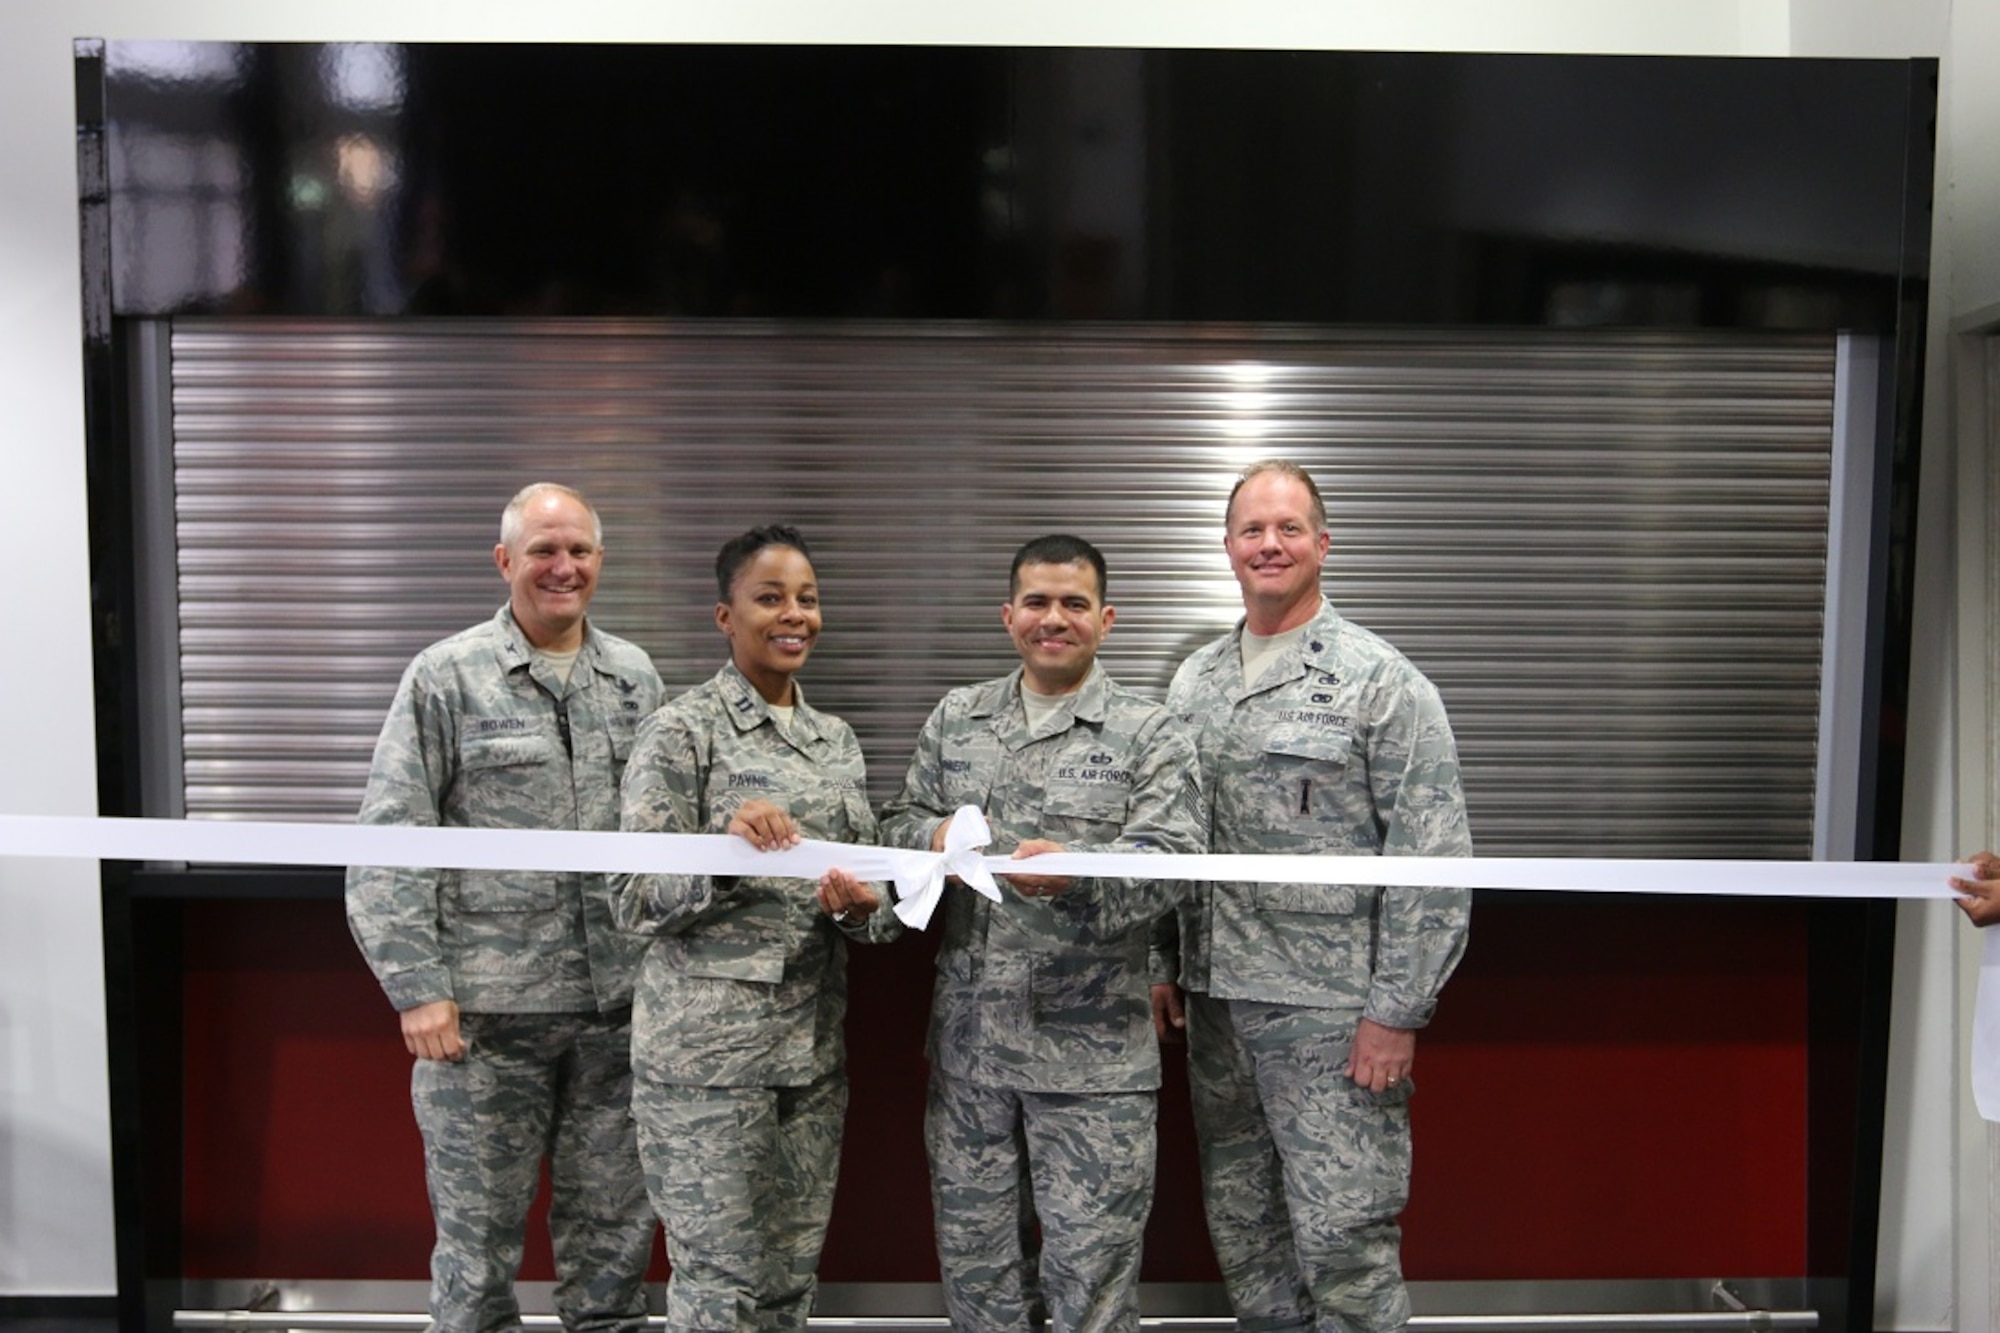 BUECHEL AIR BASE, Germany-- Col. Mark E. Bowen, 52nd Munitions Maintenance Group commander, stands with other leaders during the grand re-opening ribbon cutting ceremony of the Tornado Tavern Club at Beuchel Air Base, Germany.